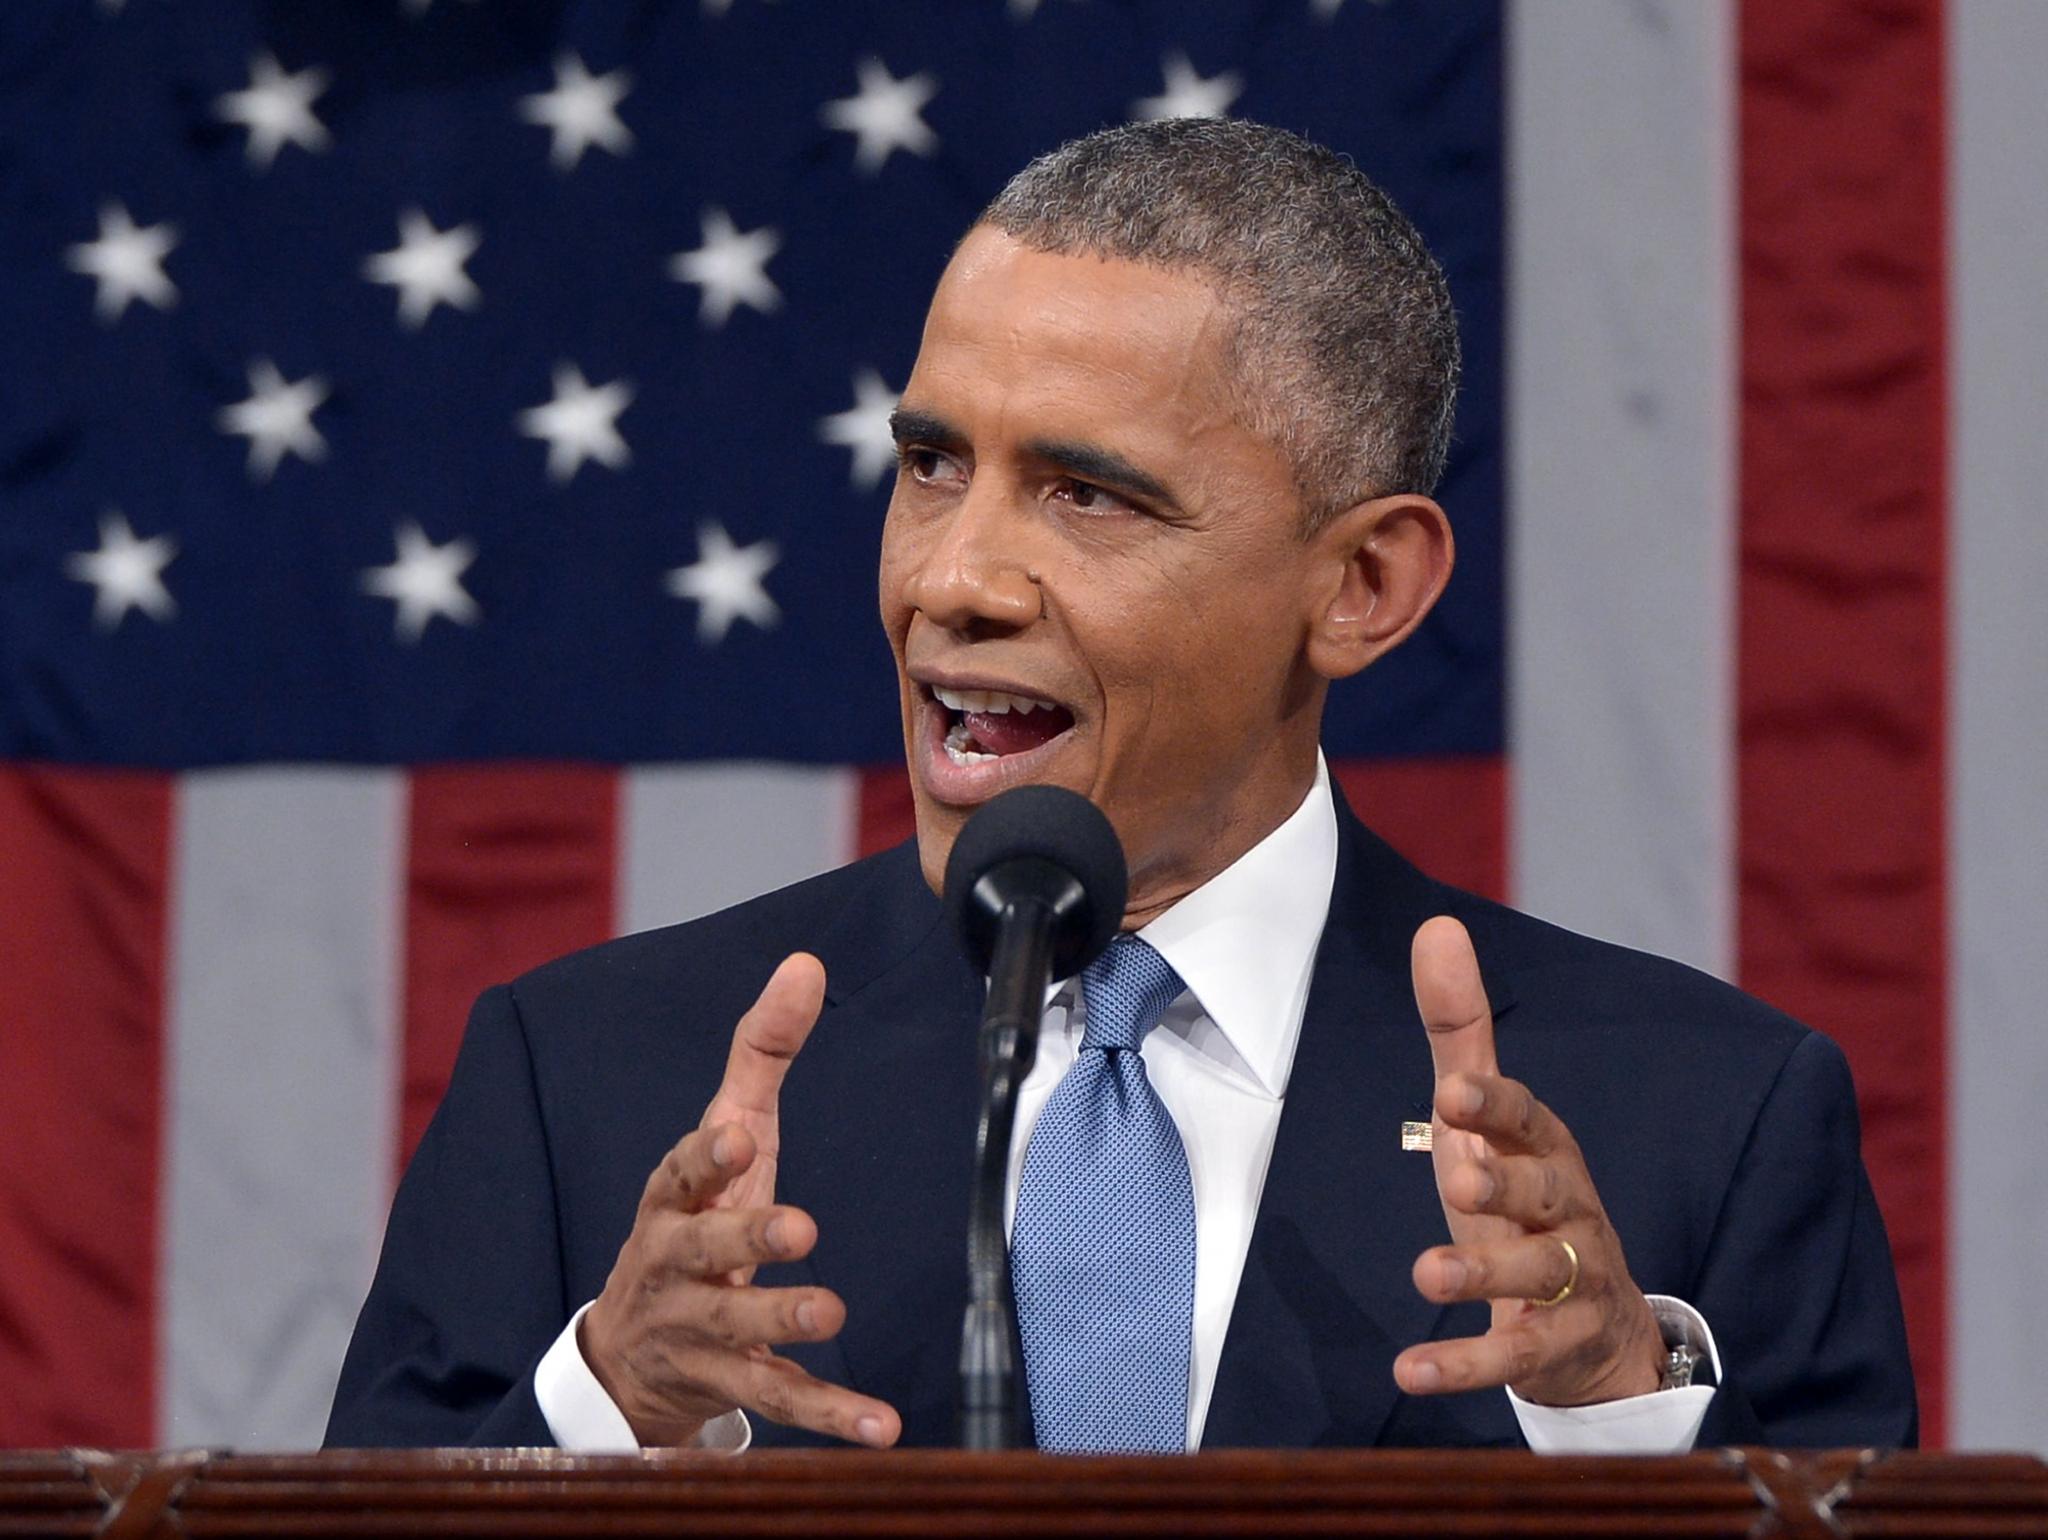 ESSENCE Poll: Do You Agree with President Obama’s Call for Military Action?